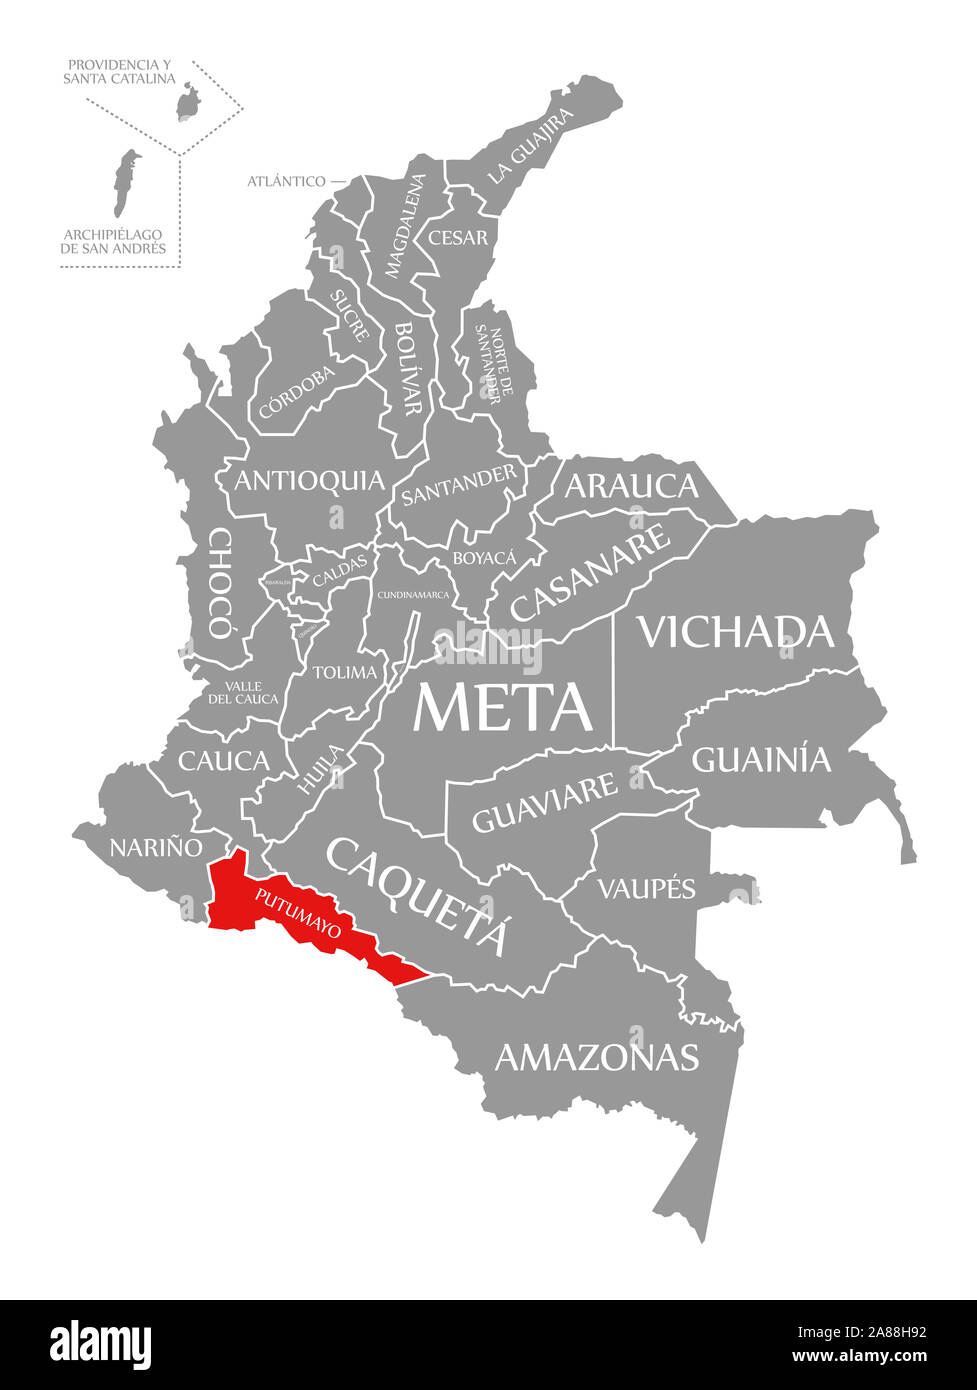 Putumayo red highlighted in map of Colombia Stock Photo